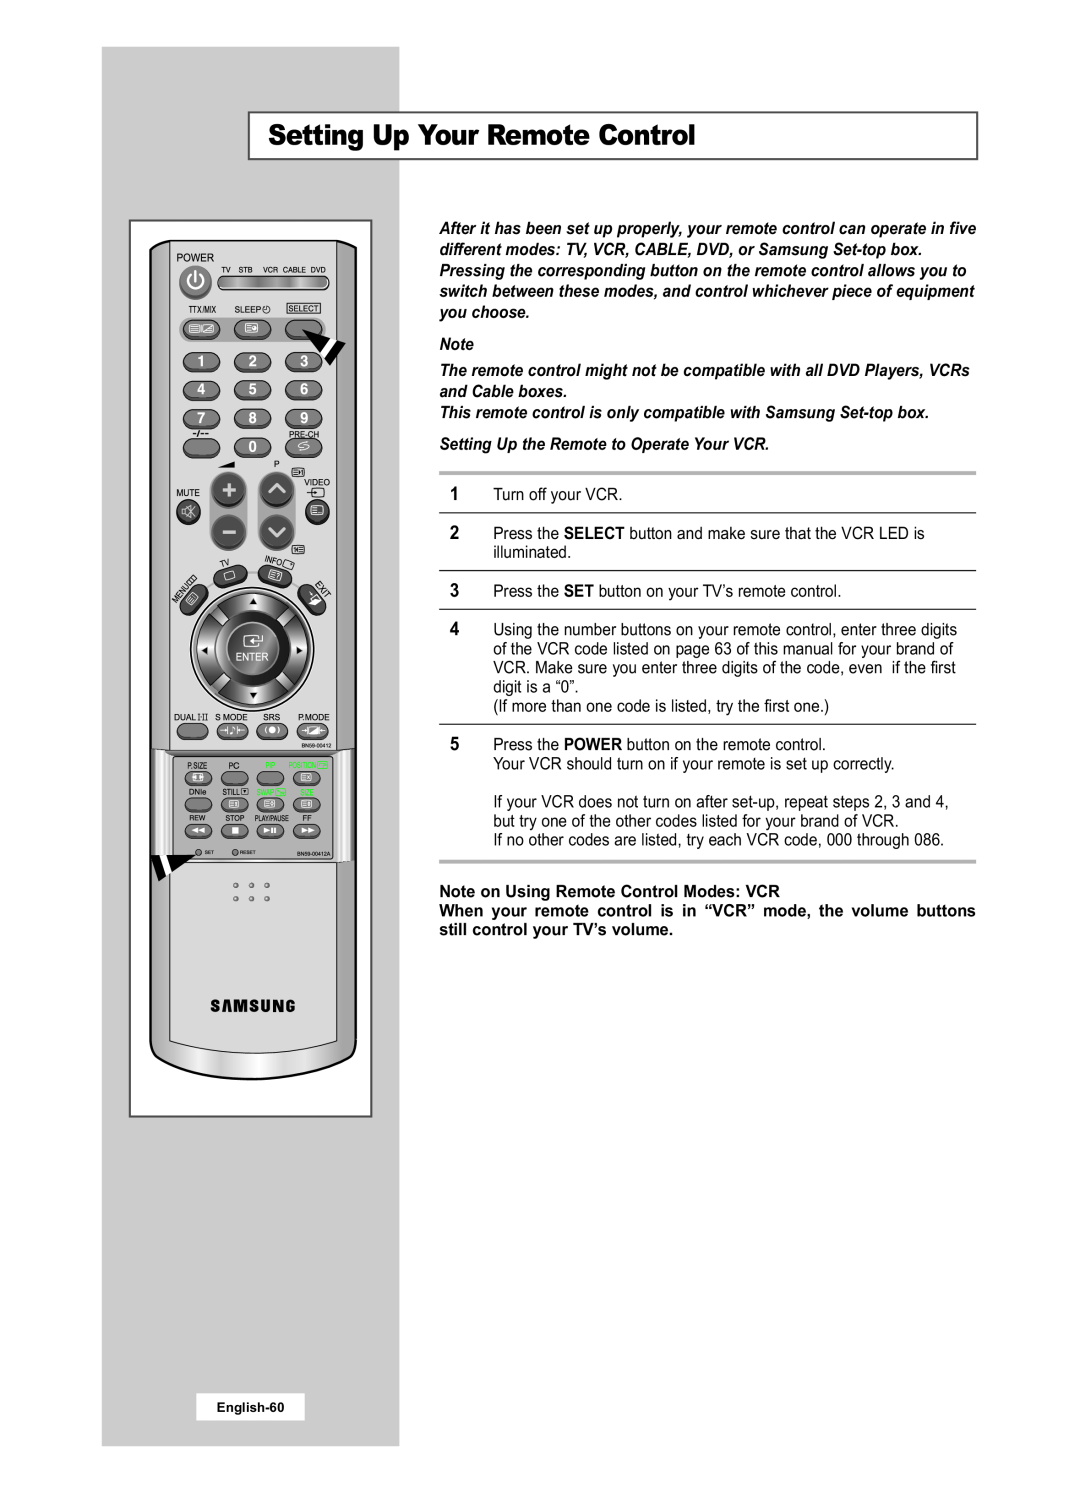 Samsung LA22N21B manual Setting Up Your Remote Control, This remote control is only compatible with Samsung Set-top box 